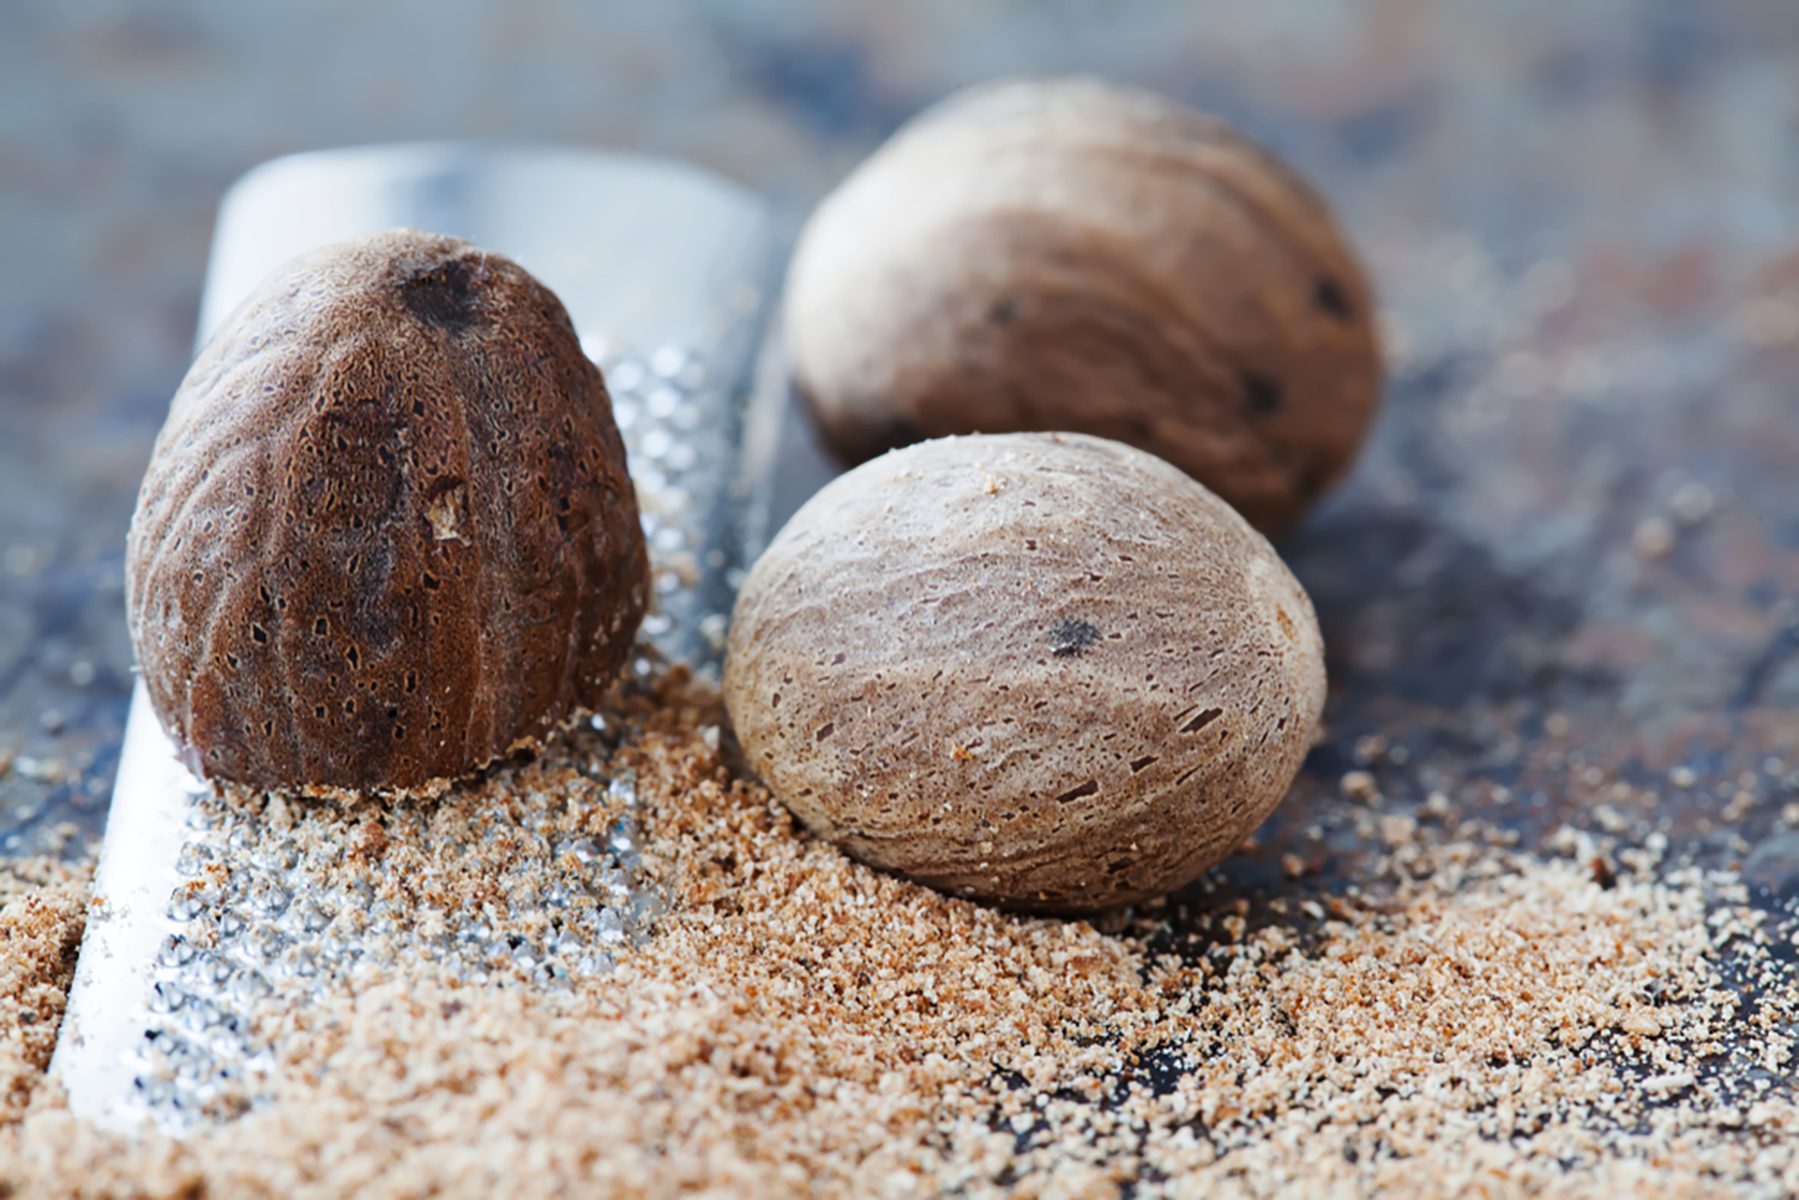 Making nutmeg powder process. Nuts silver grater. Kitchen still life photo. Shallow depth of field, aged brown rusty background. Selective focus.; Shutterstock ID 1059835649